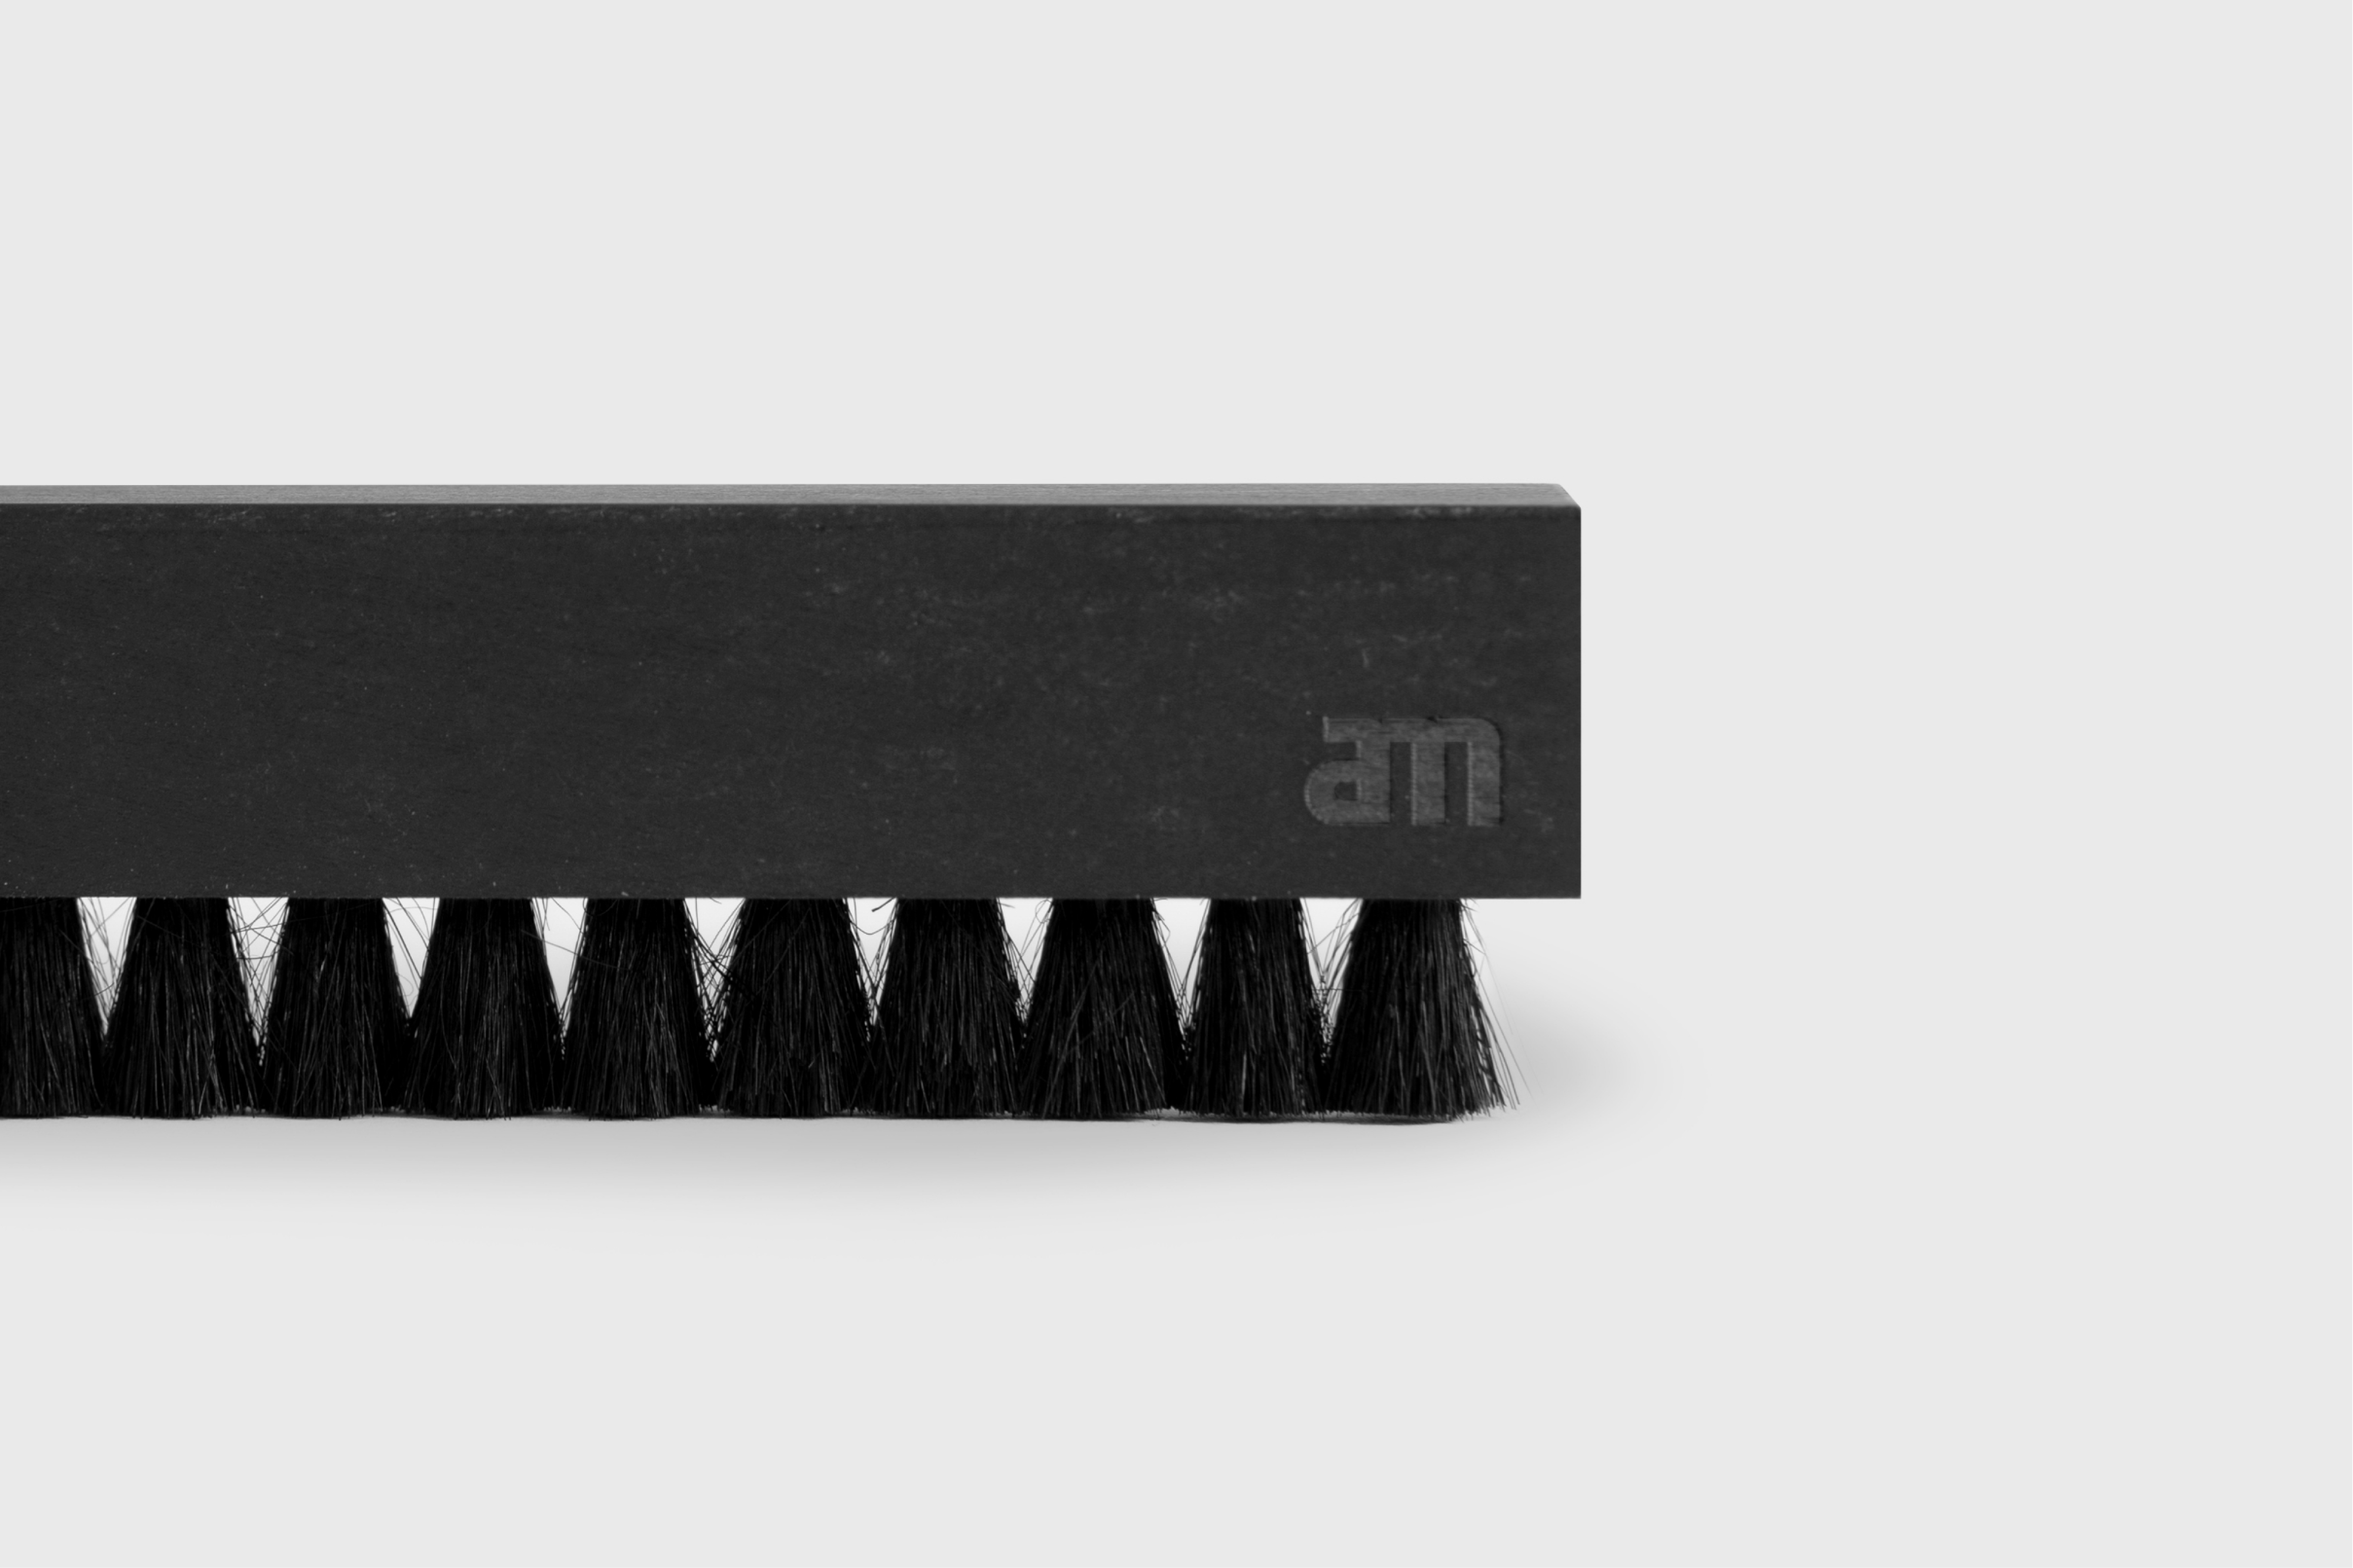 AmHydro.com: GroClean Channel Cleaning Brush - American Hydroponics